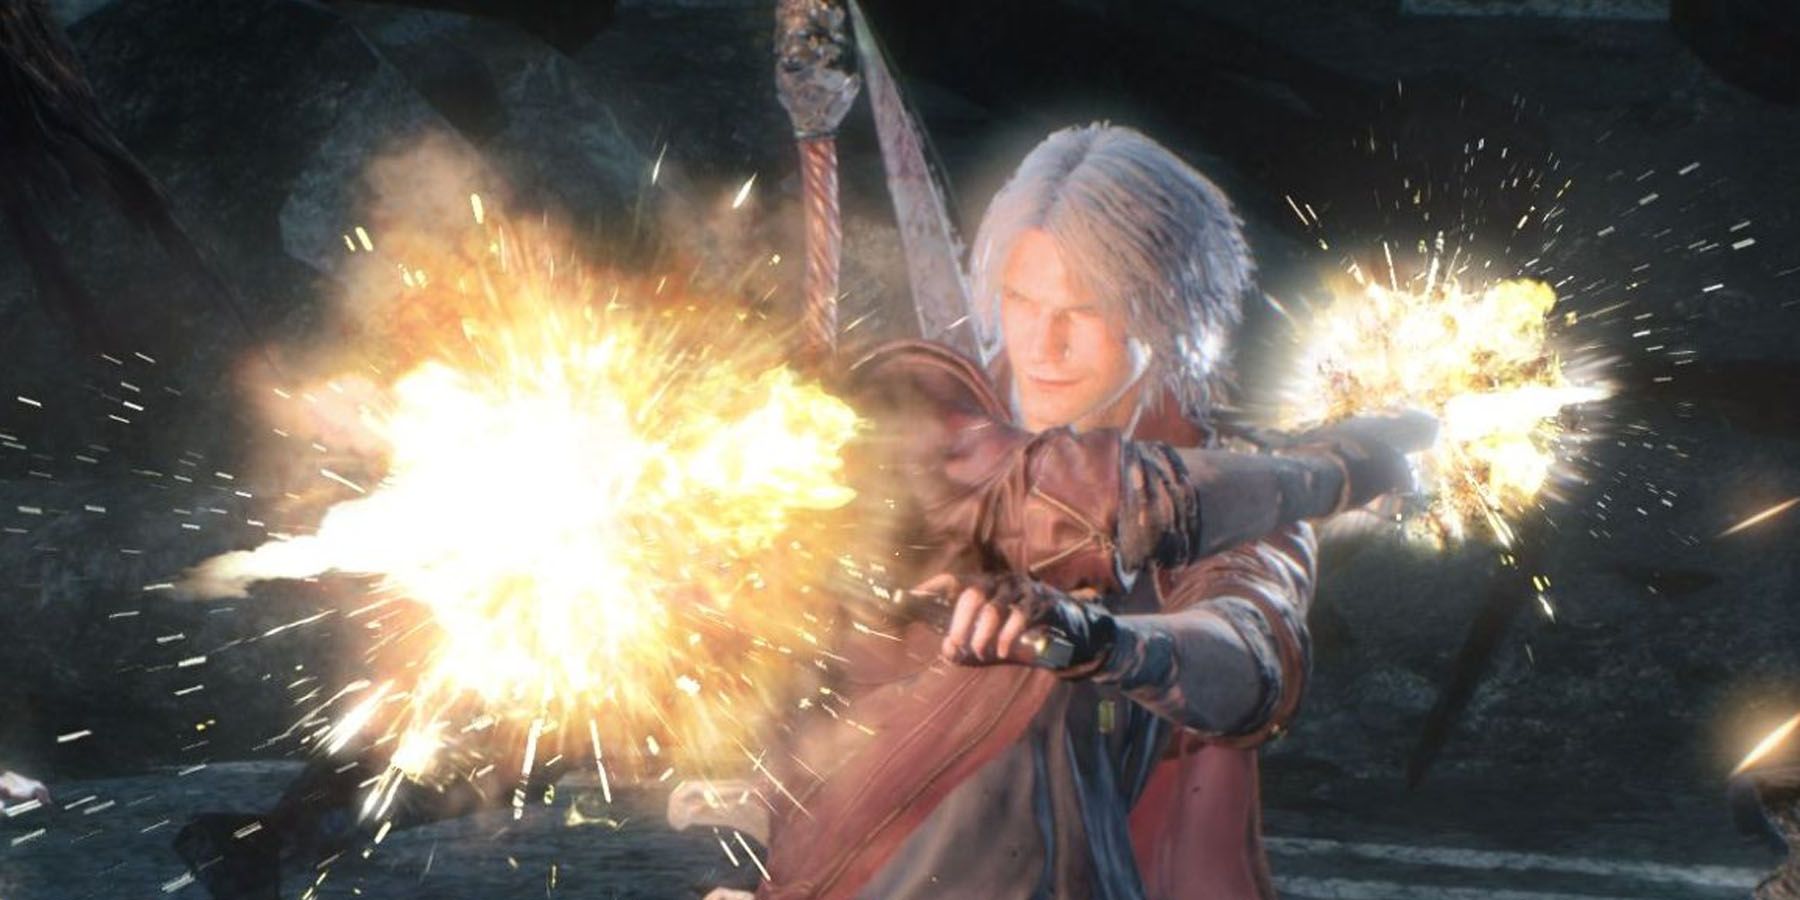 Dante attacking with his guns